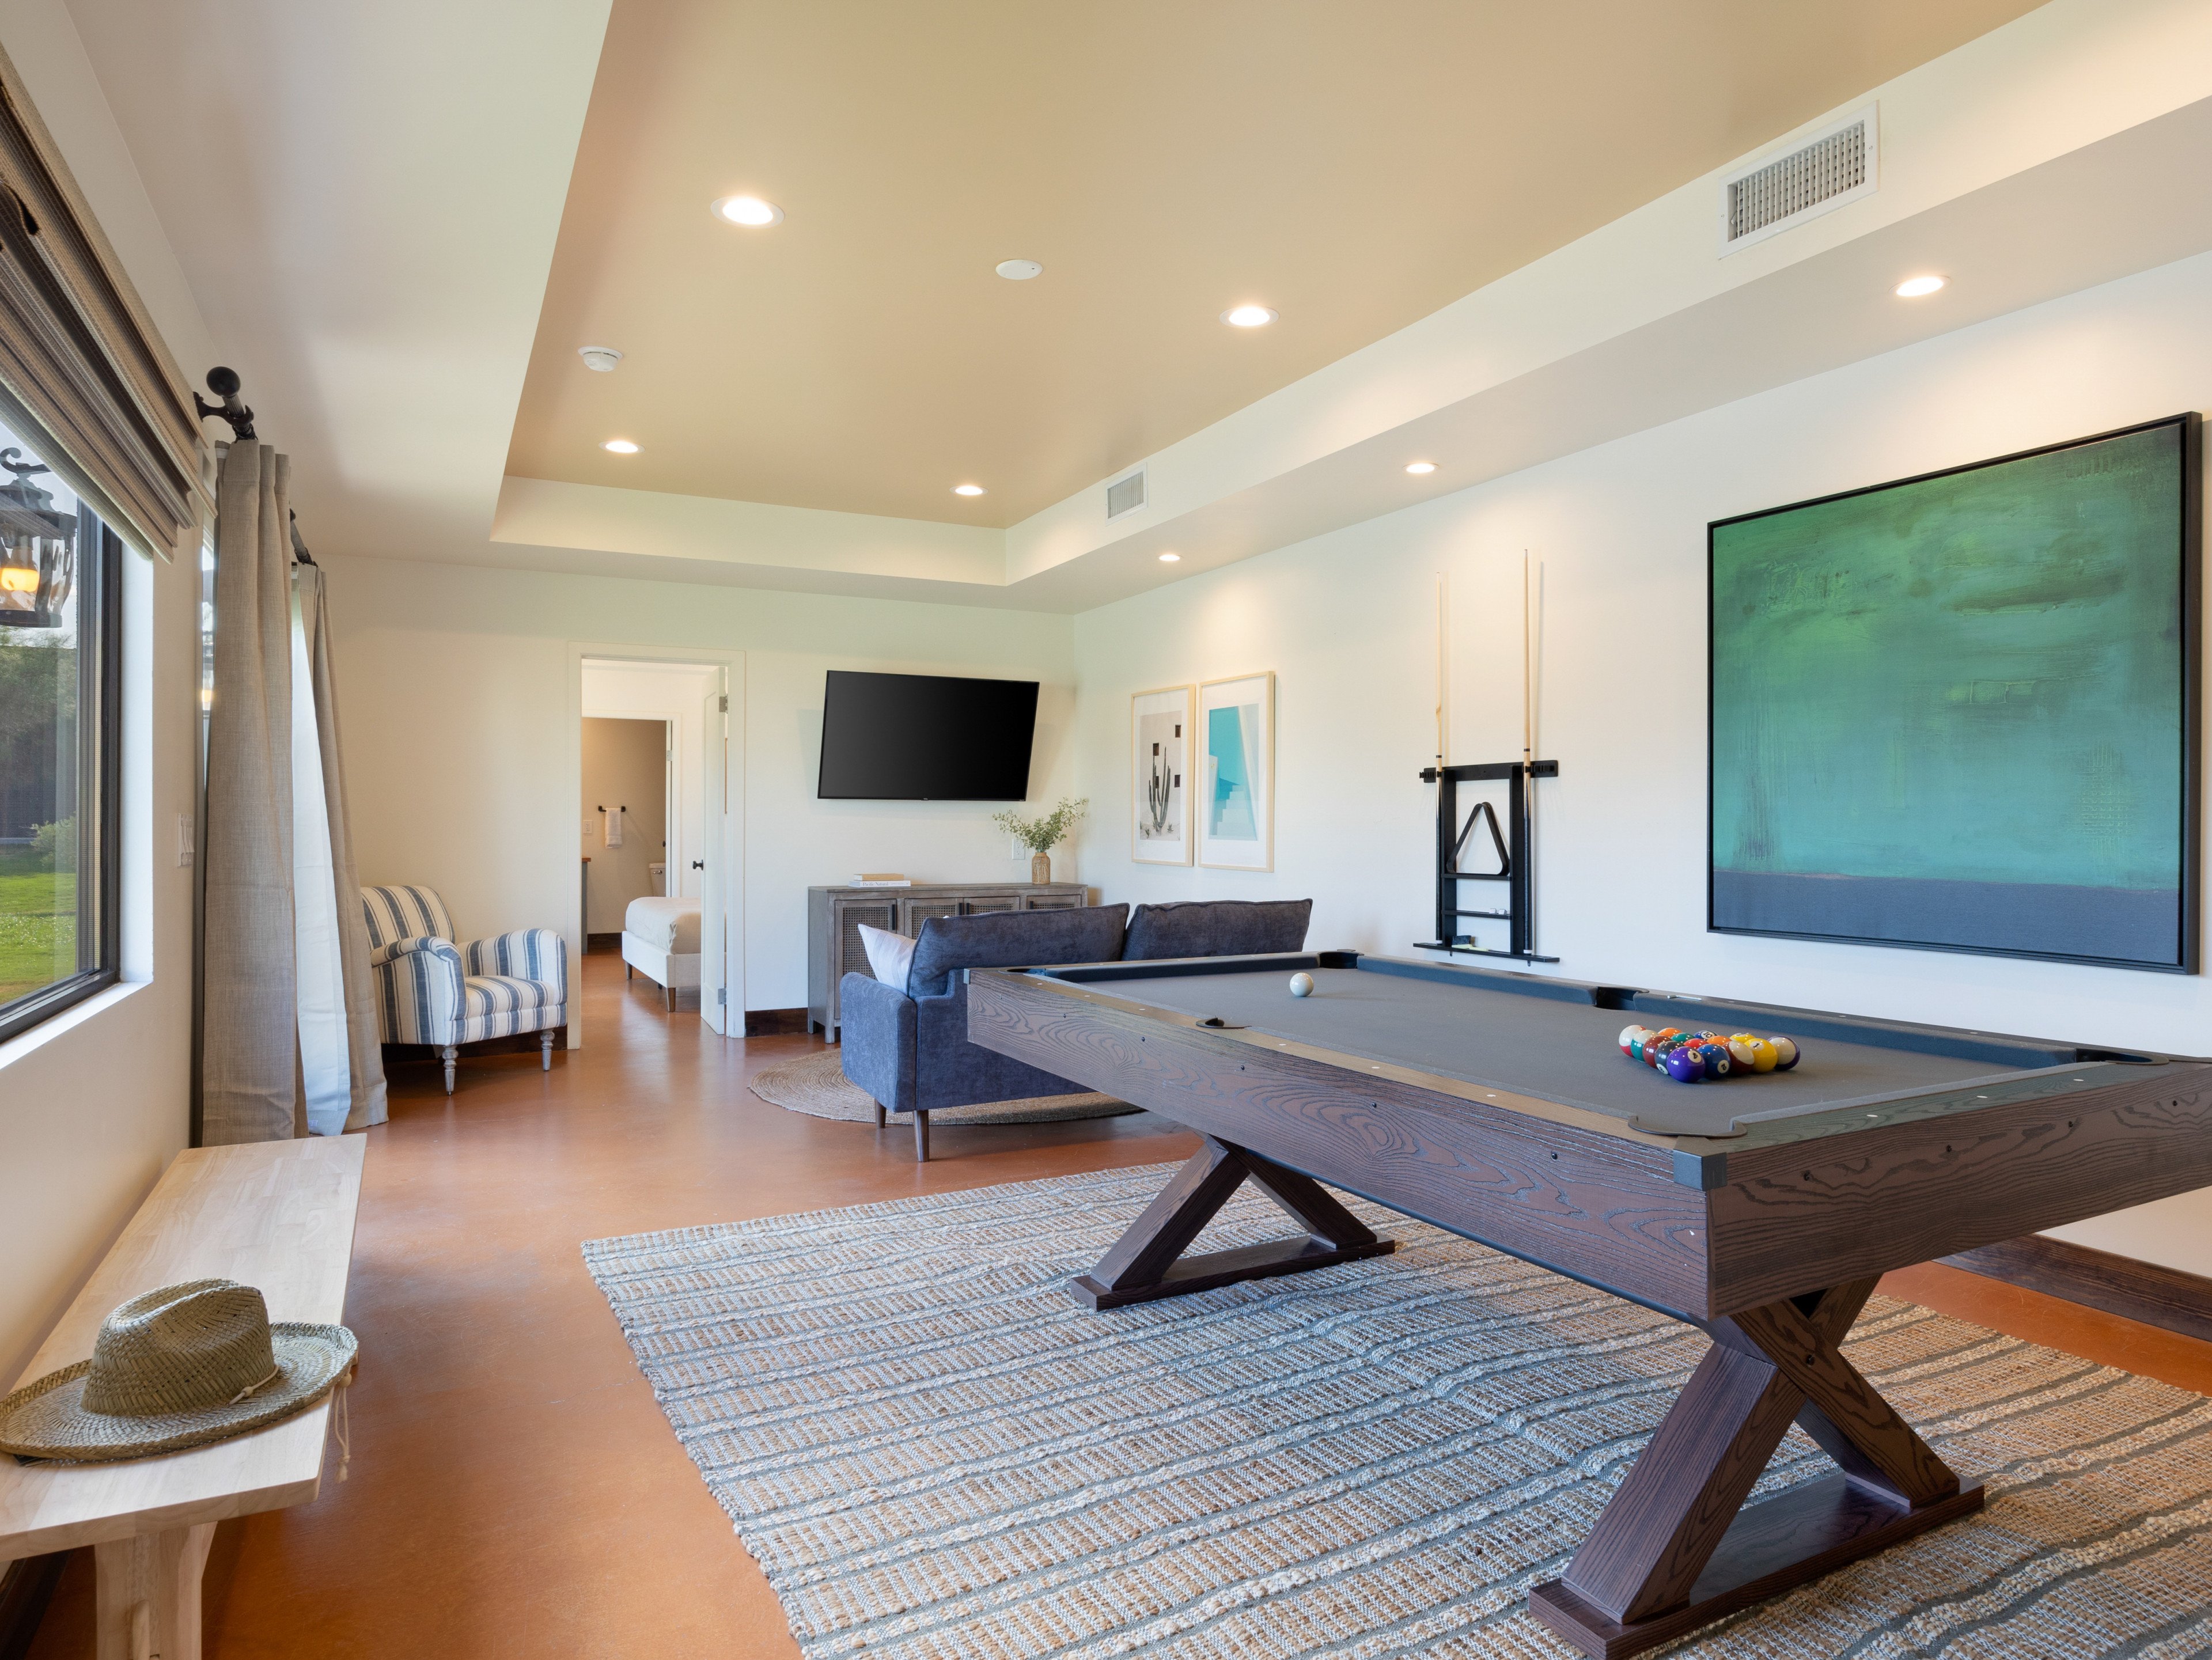 Bermuda Dunes 9 villa with pool and game room